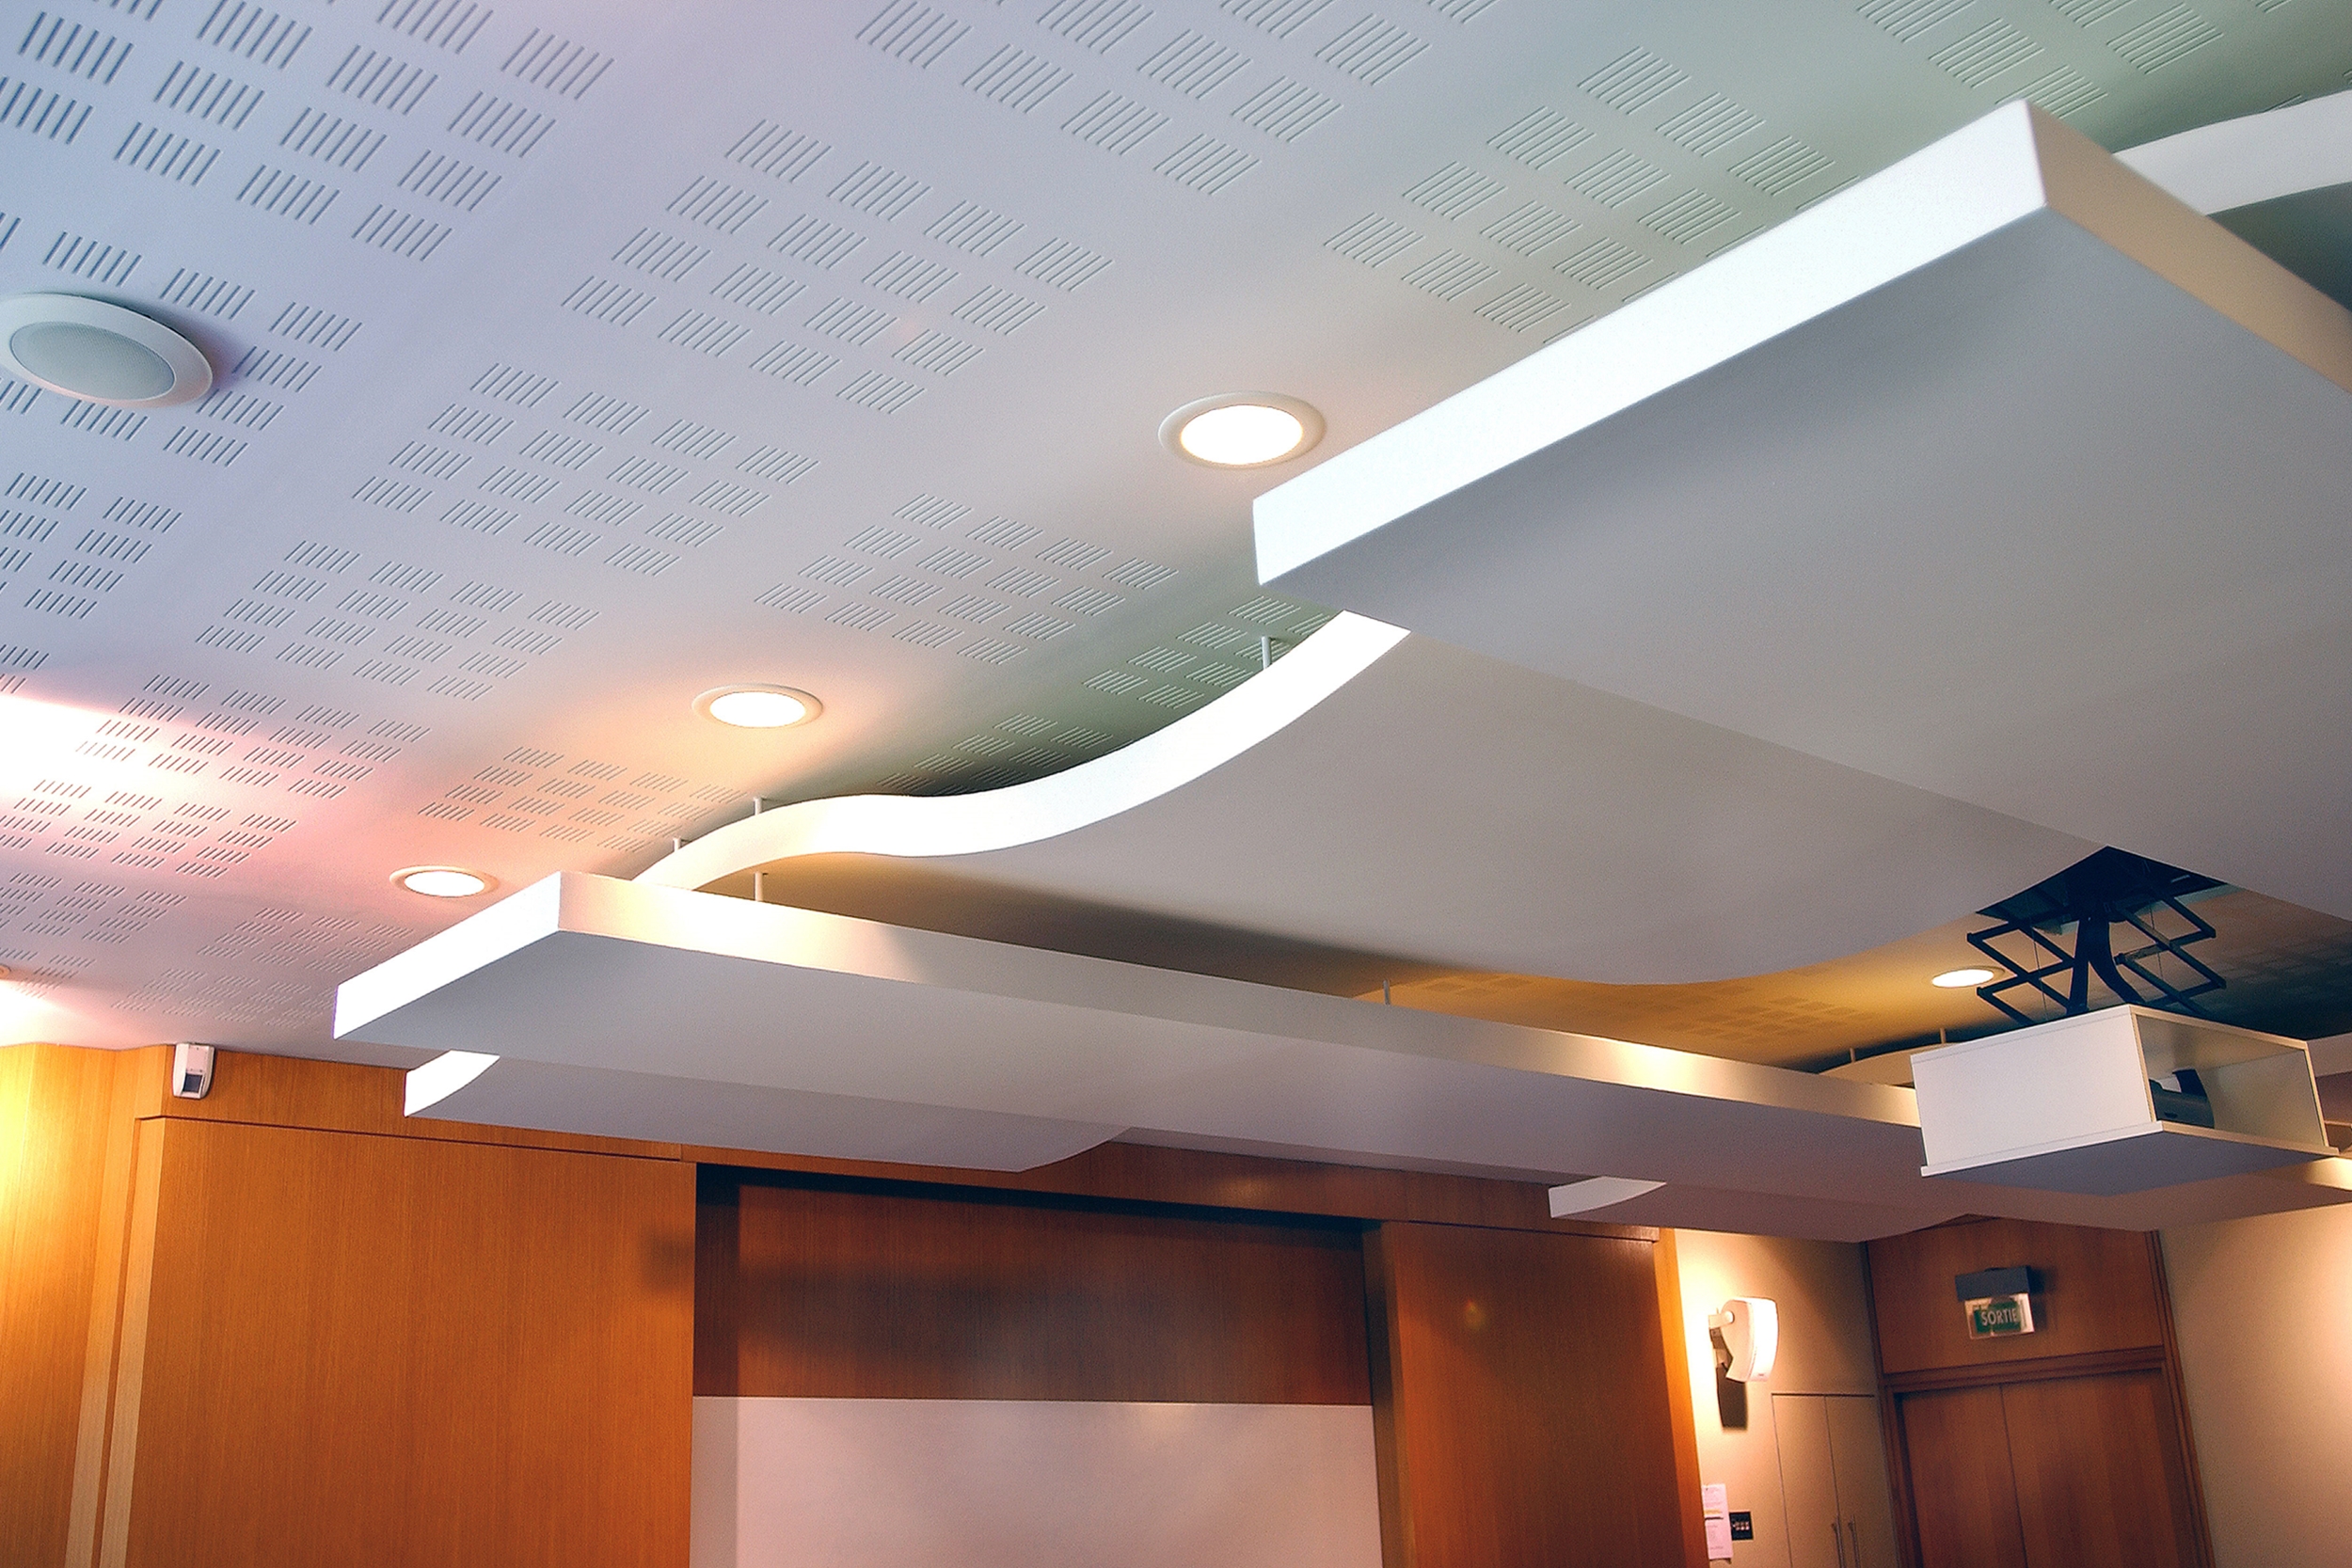 The use of gypsum board in Singapore